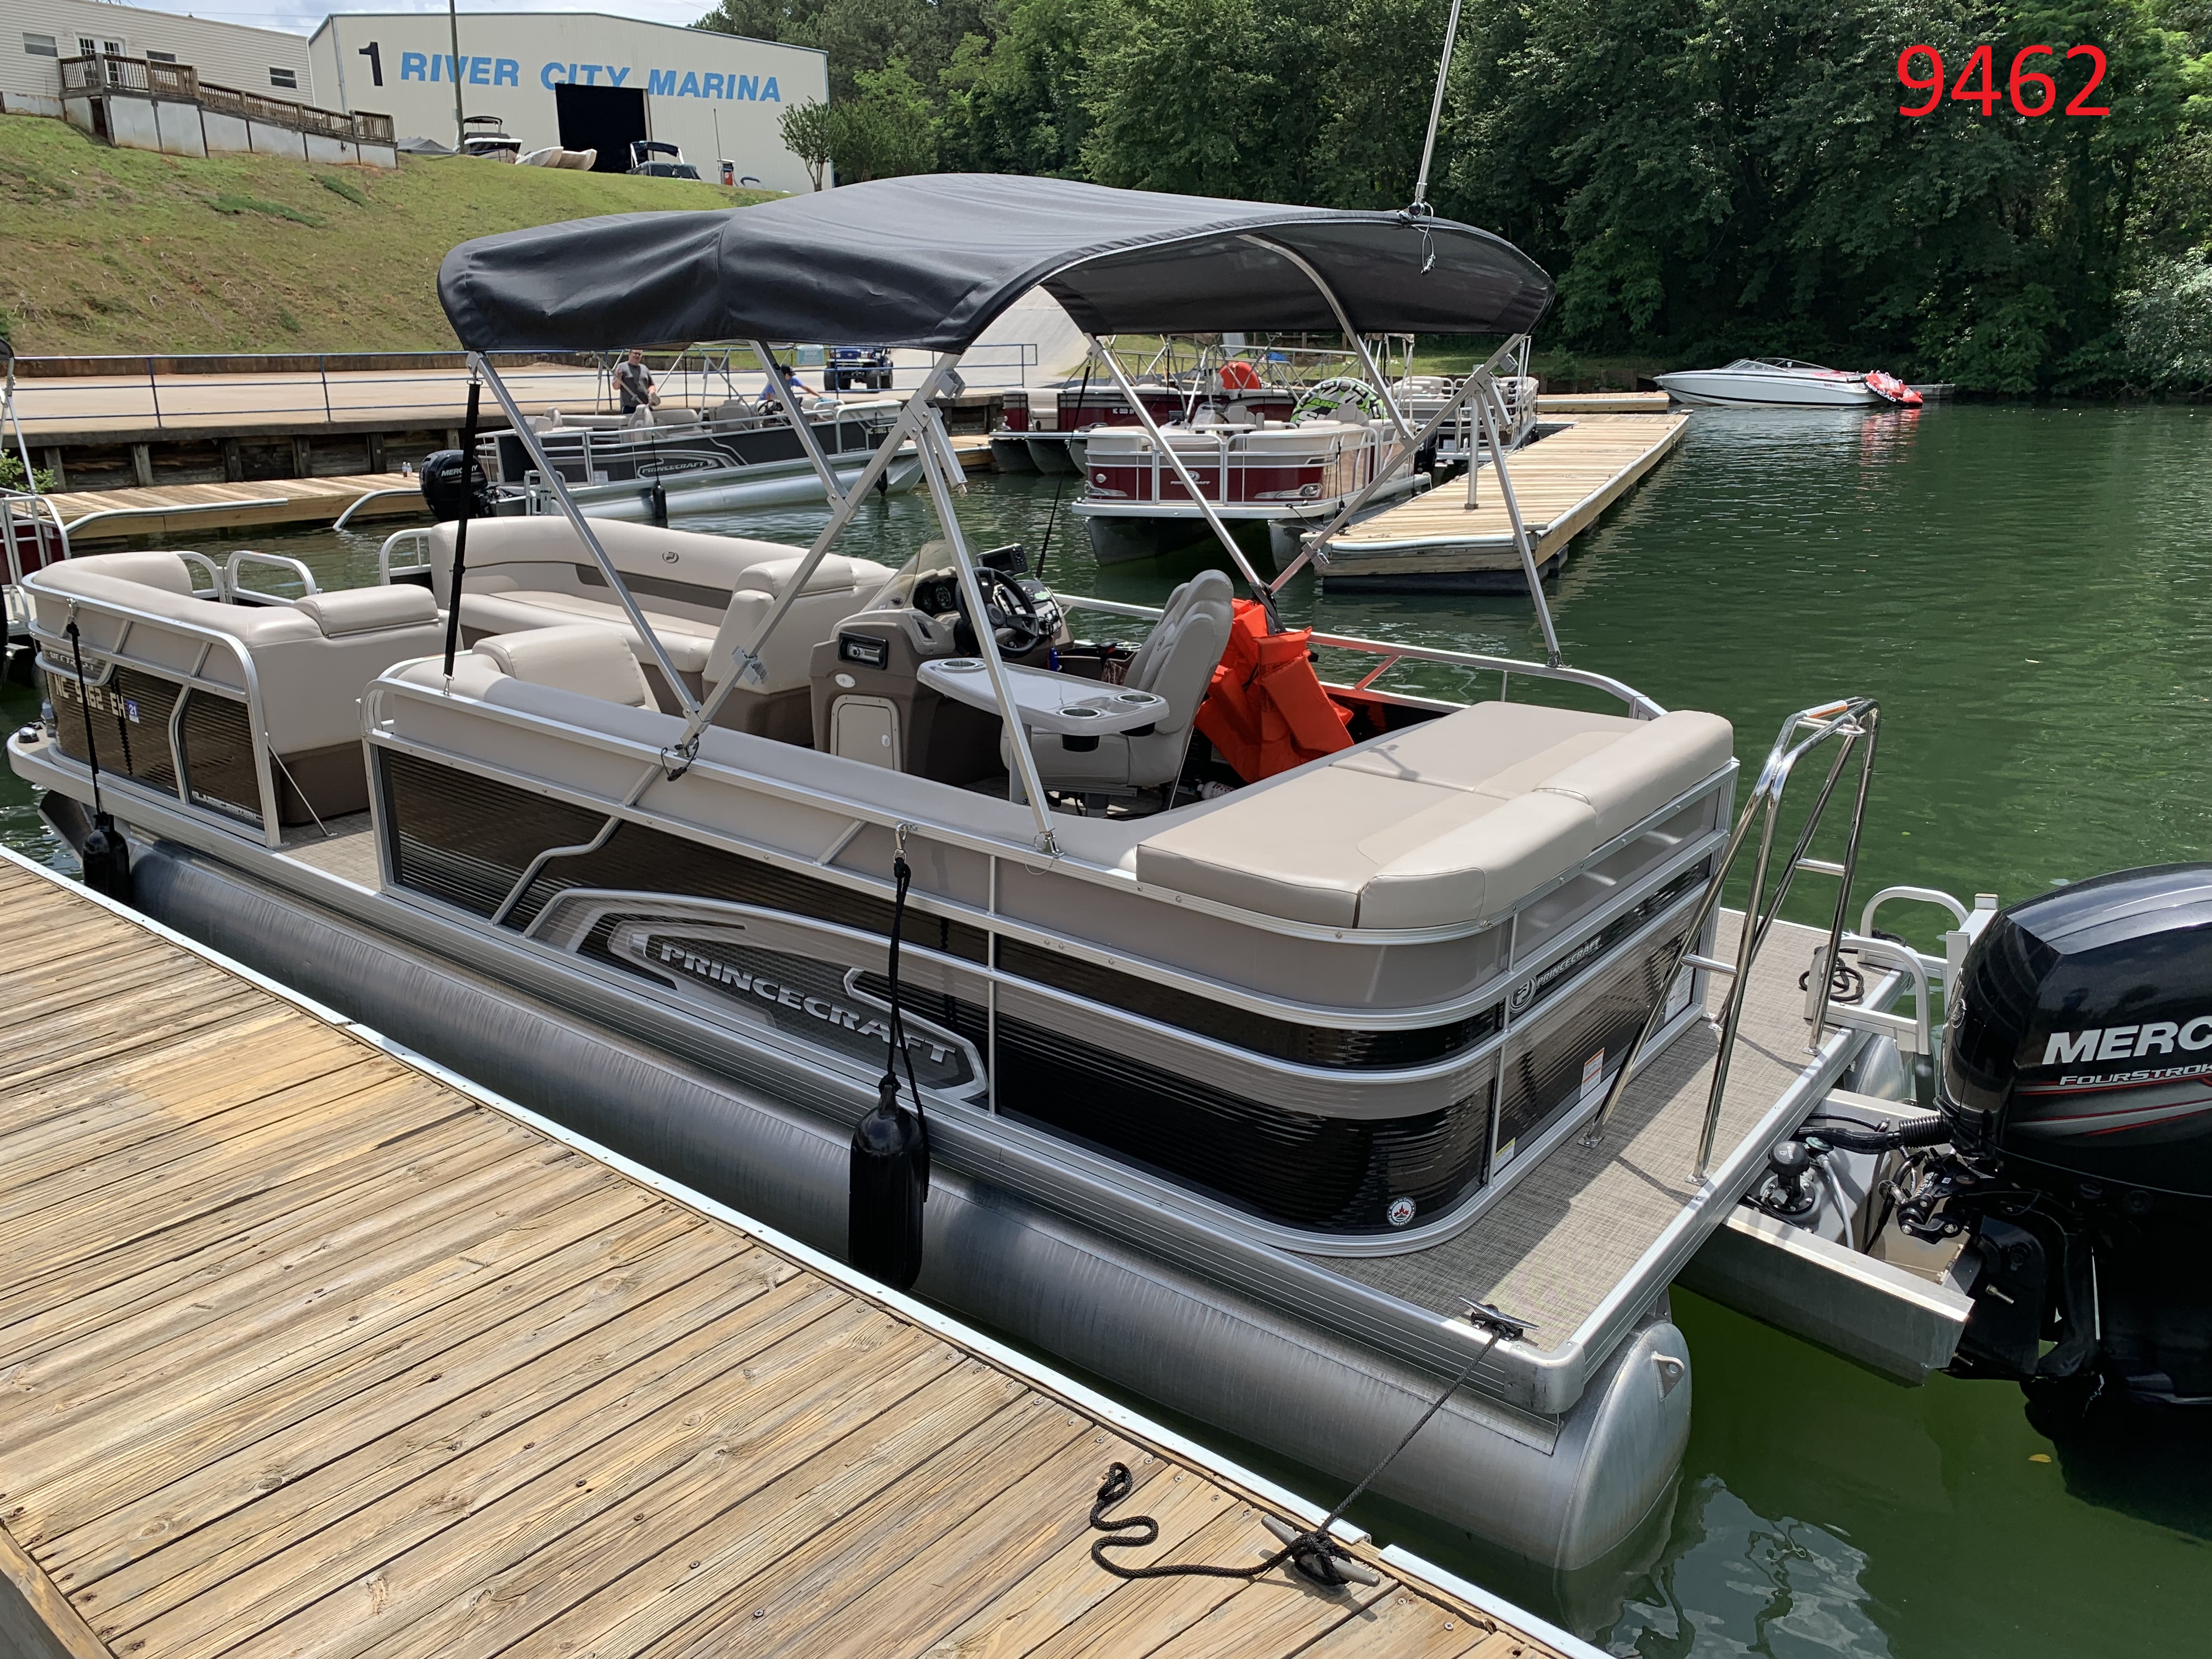 Fish Lake Pontoon Boat Rental / Pontoon Boat Rental Lake Lanier / Bartlett lake marina is located 17 miles northeast of carefree and only one hour from phoenix.